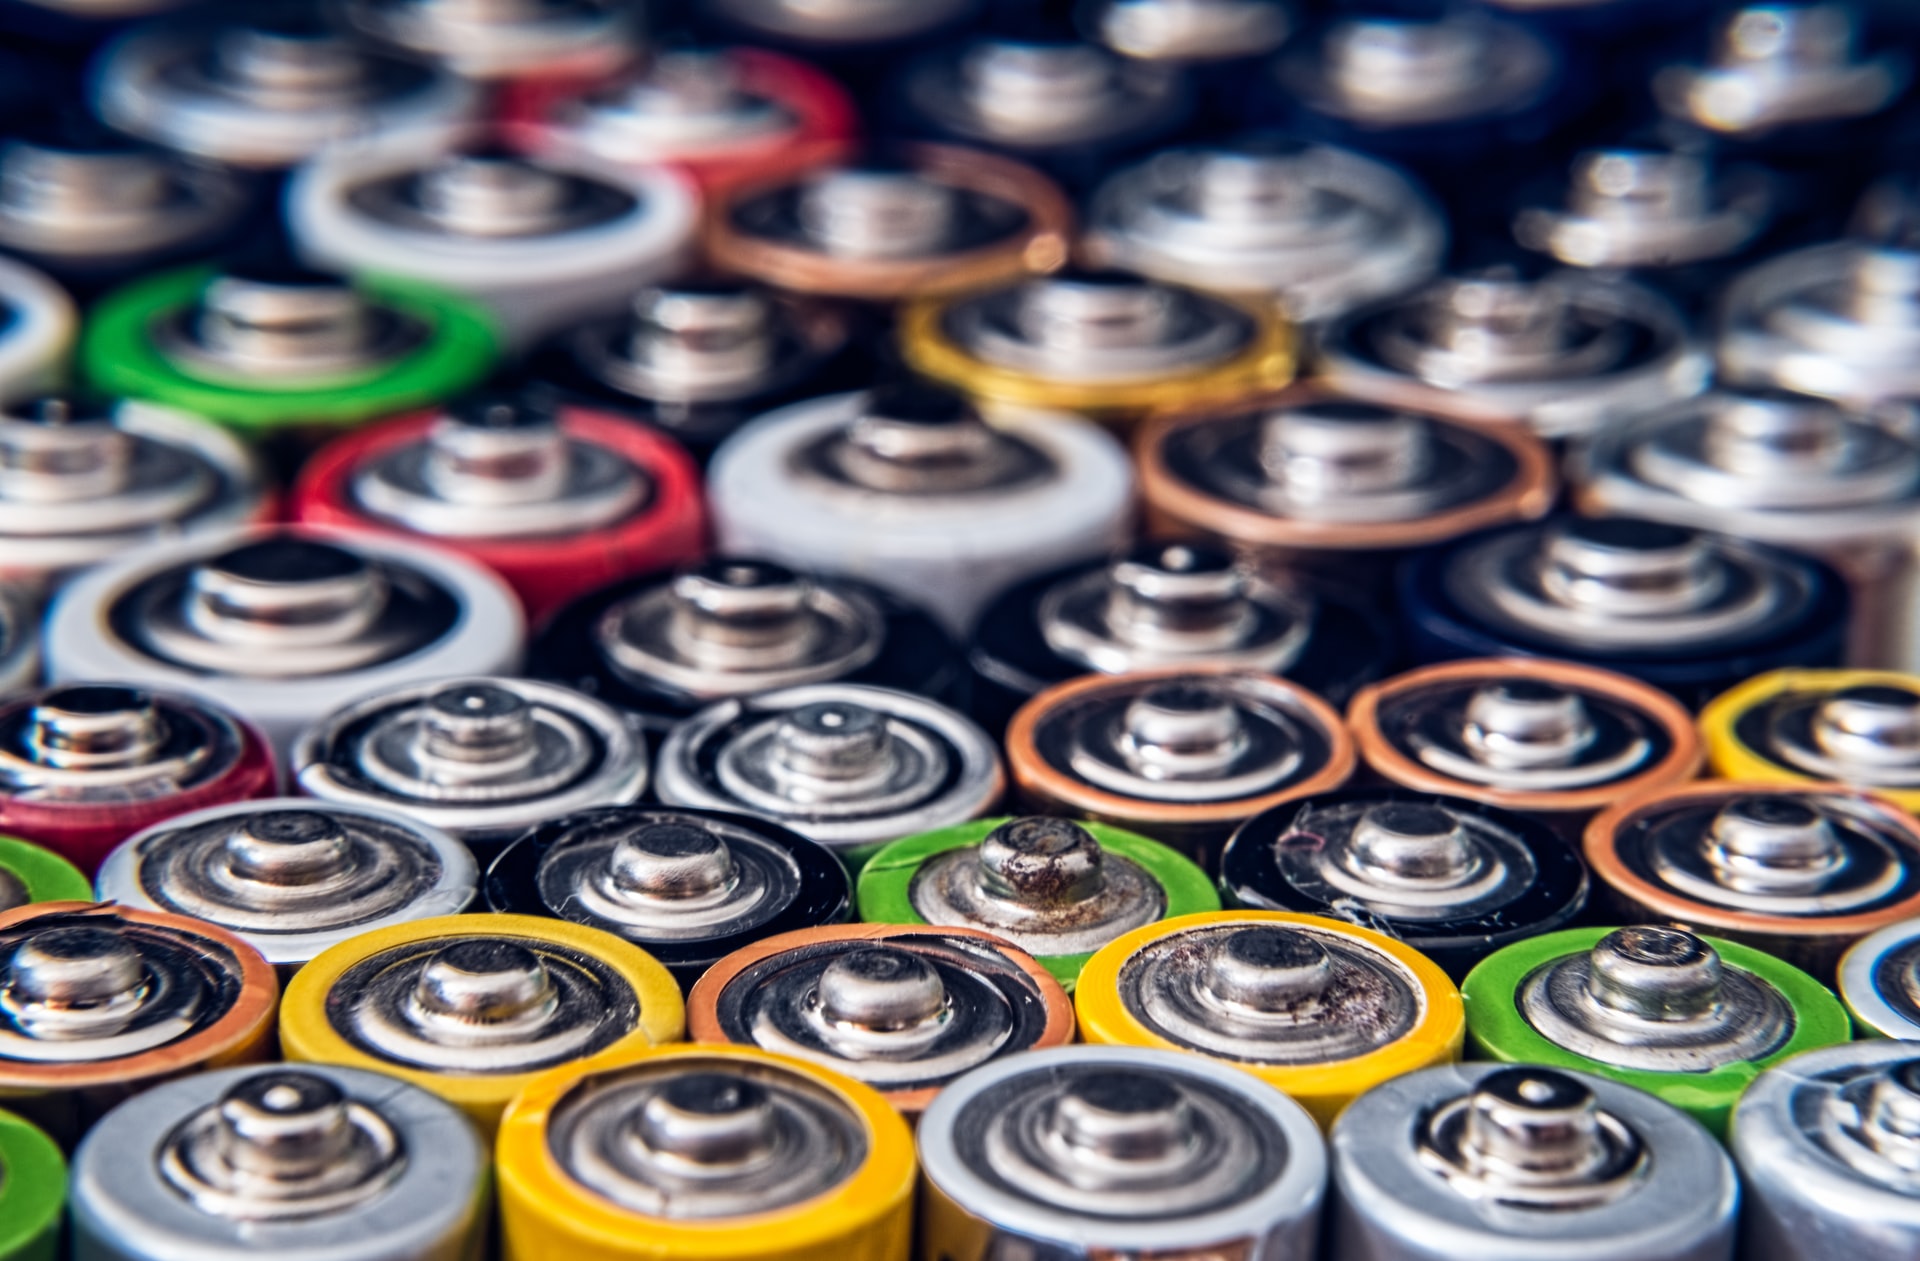 DL2032 vs. CR2032: Which Coin Cell Battery Should You Get?